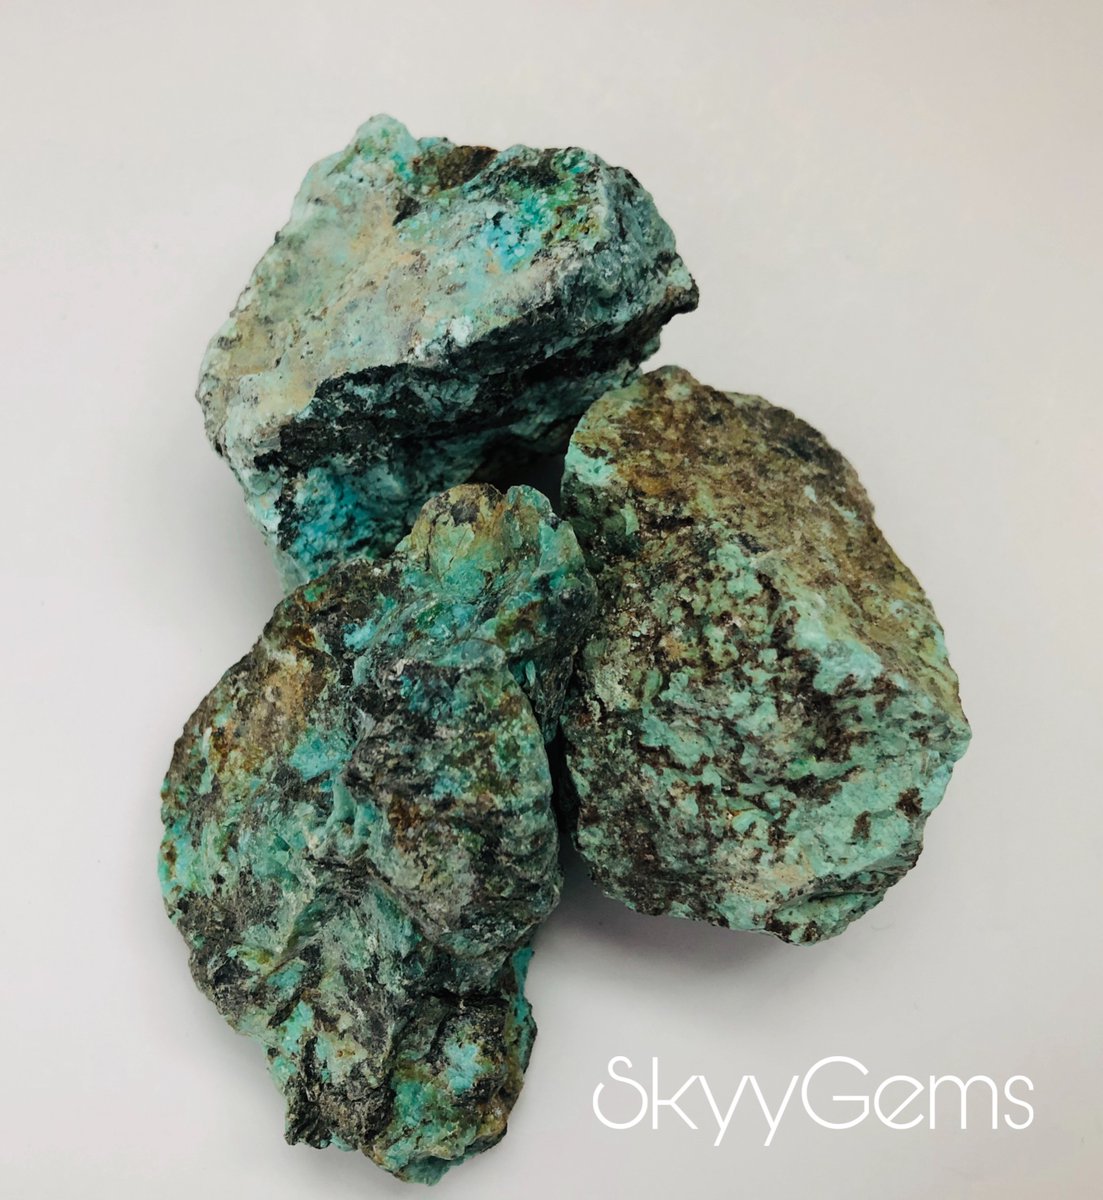 African turquoise, the stone of evolution. #skyygems #lovepeacecrystals #african #turquoise #africanturquoise #roughturquoise #roughafricanturquoise #crystals #metaphysical #metaphysicalhealing #crystalshop #communication #transformation #evolution #change